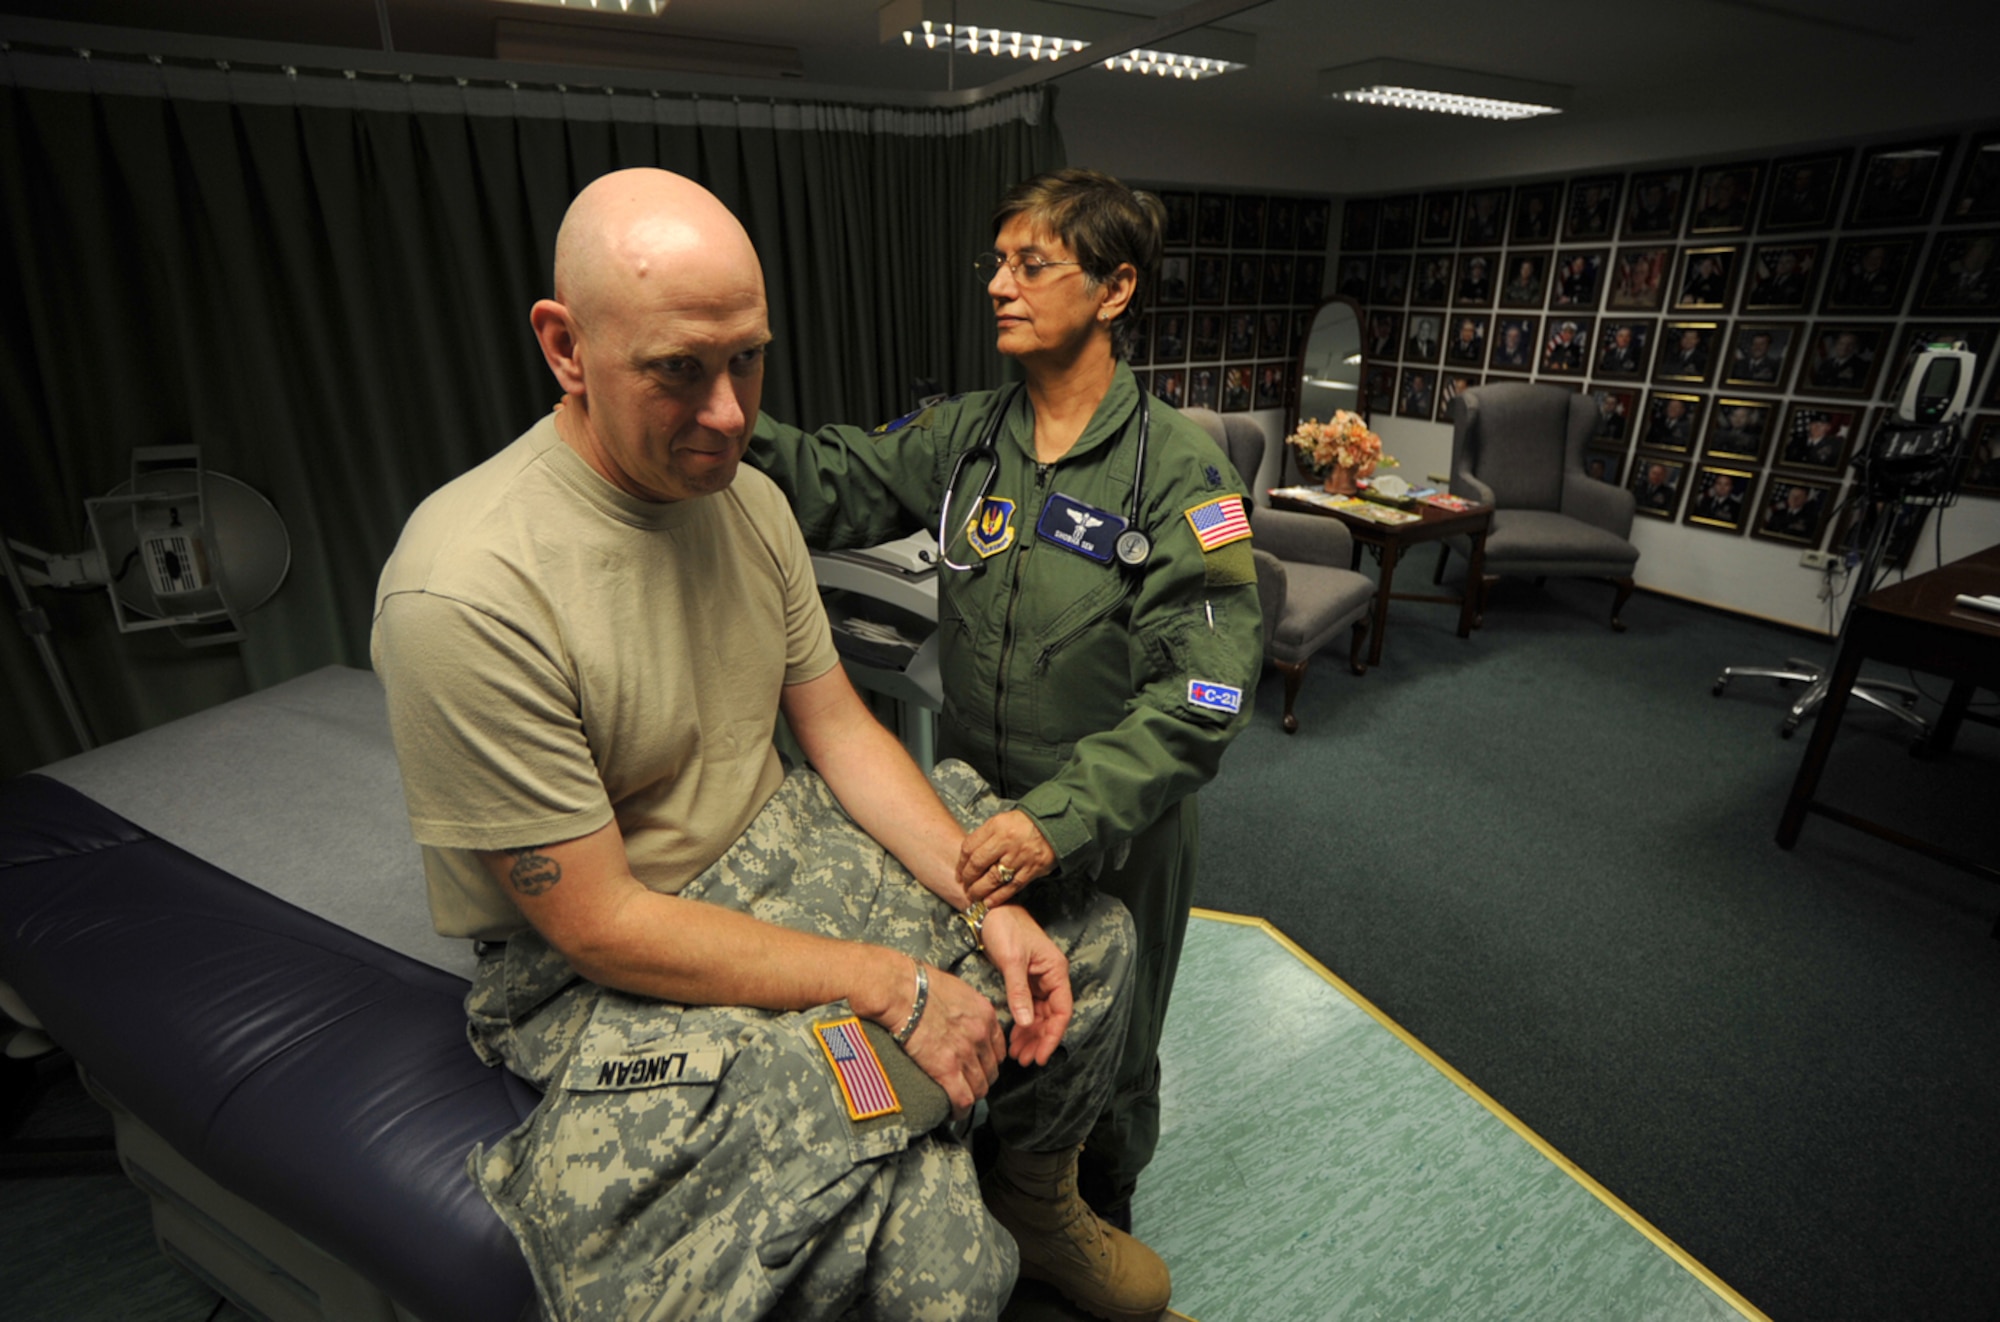 U.S. Army Col. William Langan, Office of Defense Cooperation Cyprus, gets a medical examination from U.S. Air Force Lt.Col. (Dr.) Shobha Sem, 86th Medical Group Special Operations during the U.S. European Command European Strategy Conference, Ramstein Air Base, Germany, March 2, 2010. During the week-long conference, attendees were able to bring all their medical care up to date thanks to the hard work of the 86th Medical Group and their concept of “Conference Medicine.” (U.S. Air Force photo by Senior AIrman Tony R. Ritter)